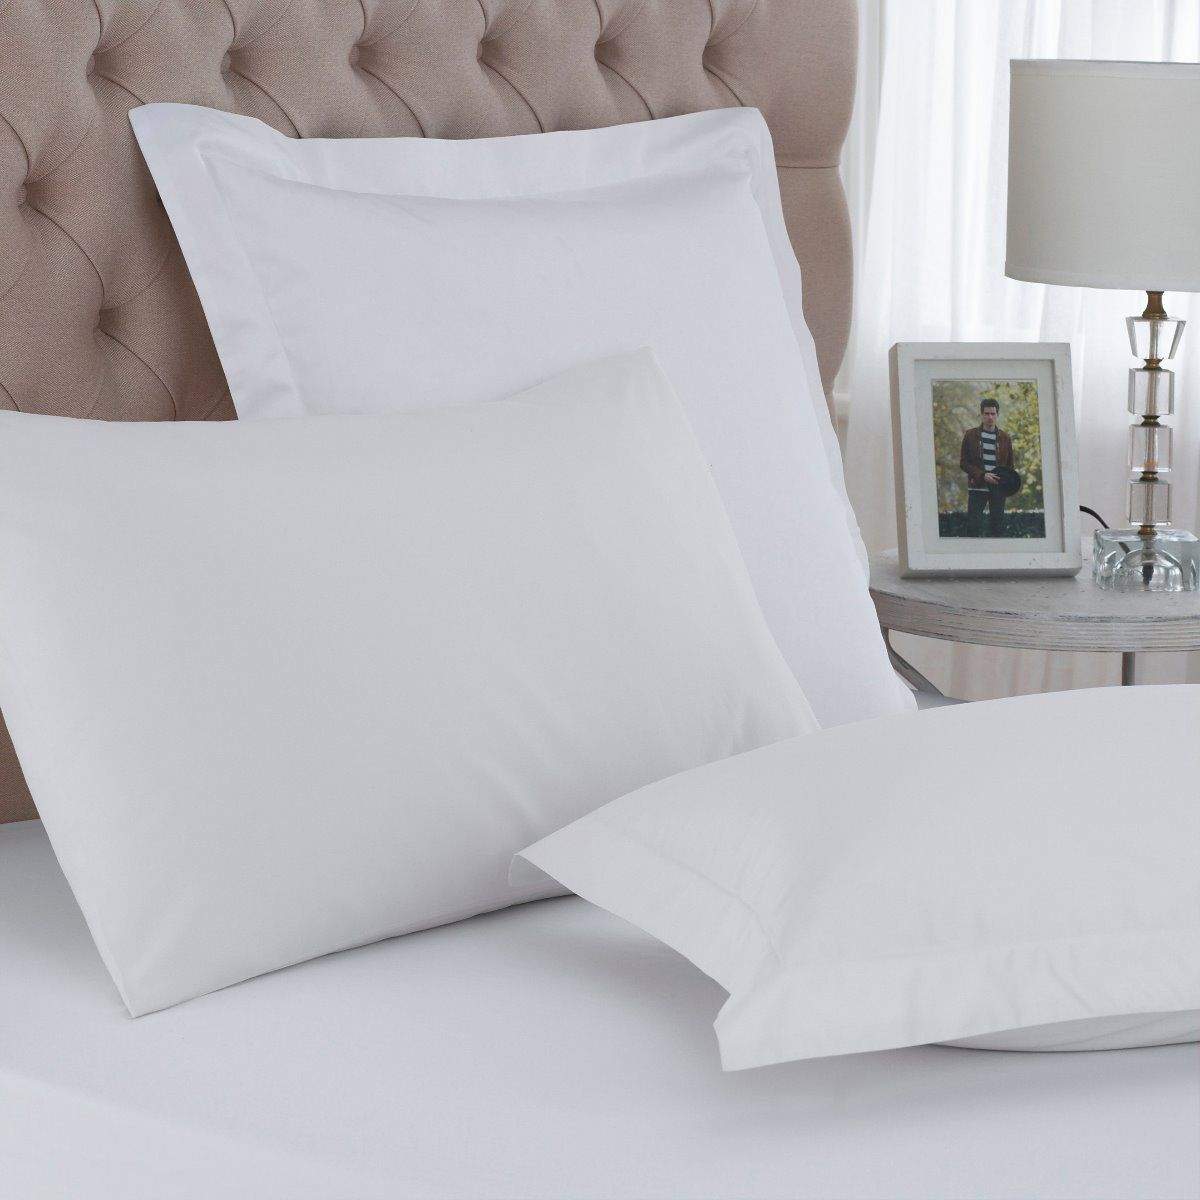 Hotel Quality White Easy Care White Pillowcases Pair Luxury Gift Packs Bed and Bath Linen